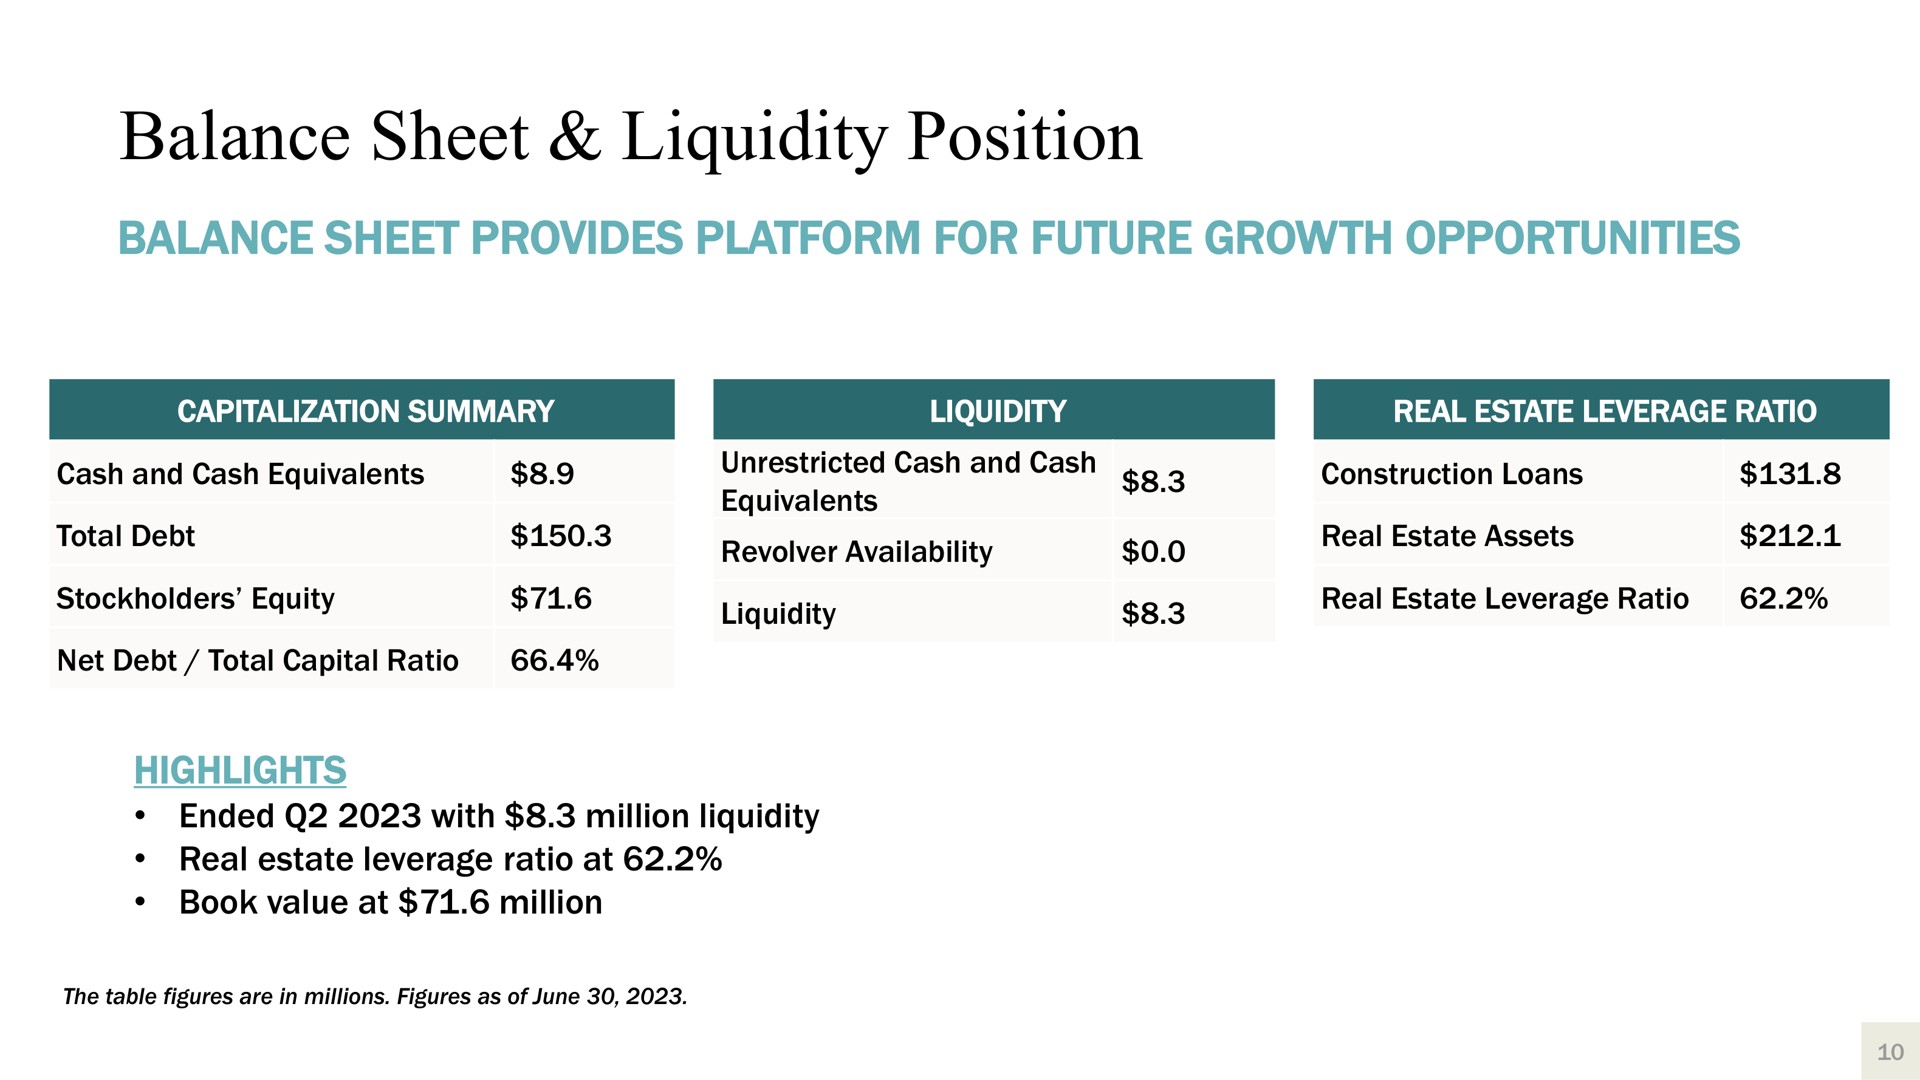 balance sheet liquidity position balance sheet provides platform for future growth opportunities capitalization summary liquidity real estate leverage ratio cash and cash equivalents total debt stockholders equity net debt total capital ratio unrestricted cash and cash equivalents revolver availability liquidity construction loans real estate assets real estate leverage ratio highlights ended with million liquidity real estate leverage ratio at book value at million nun so a | Harbor Custom Development